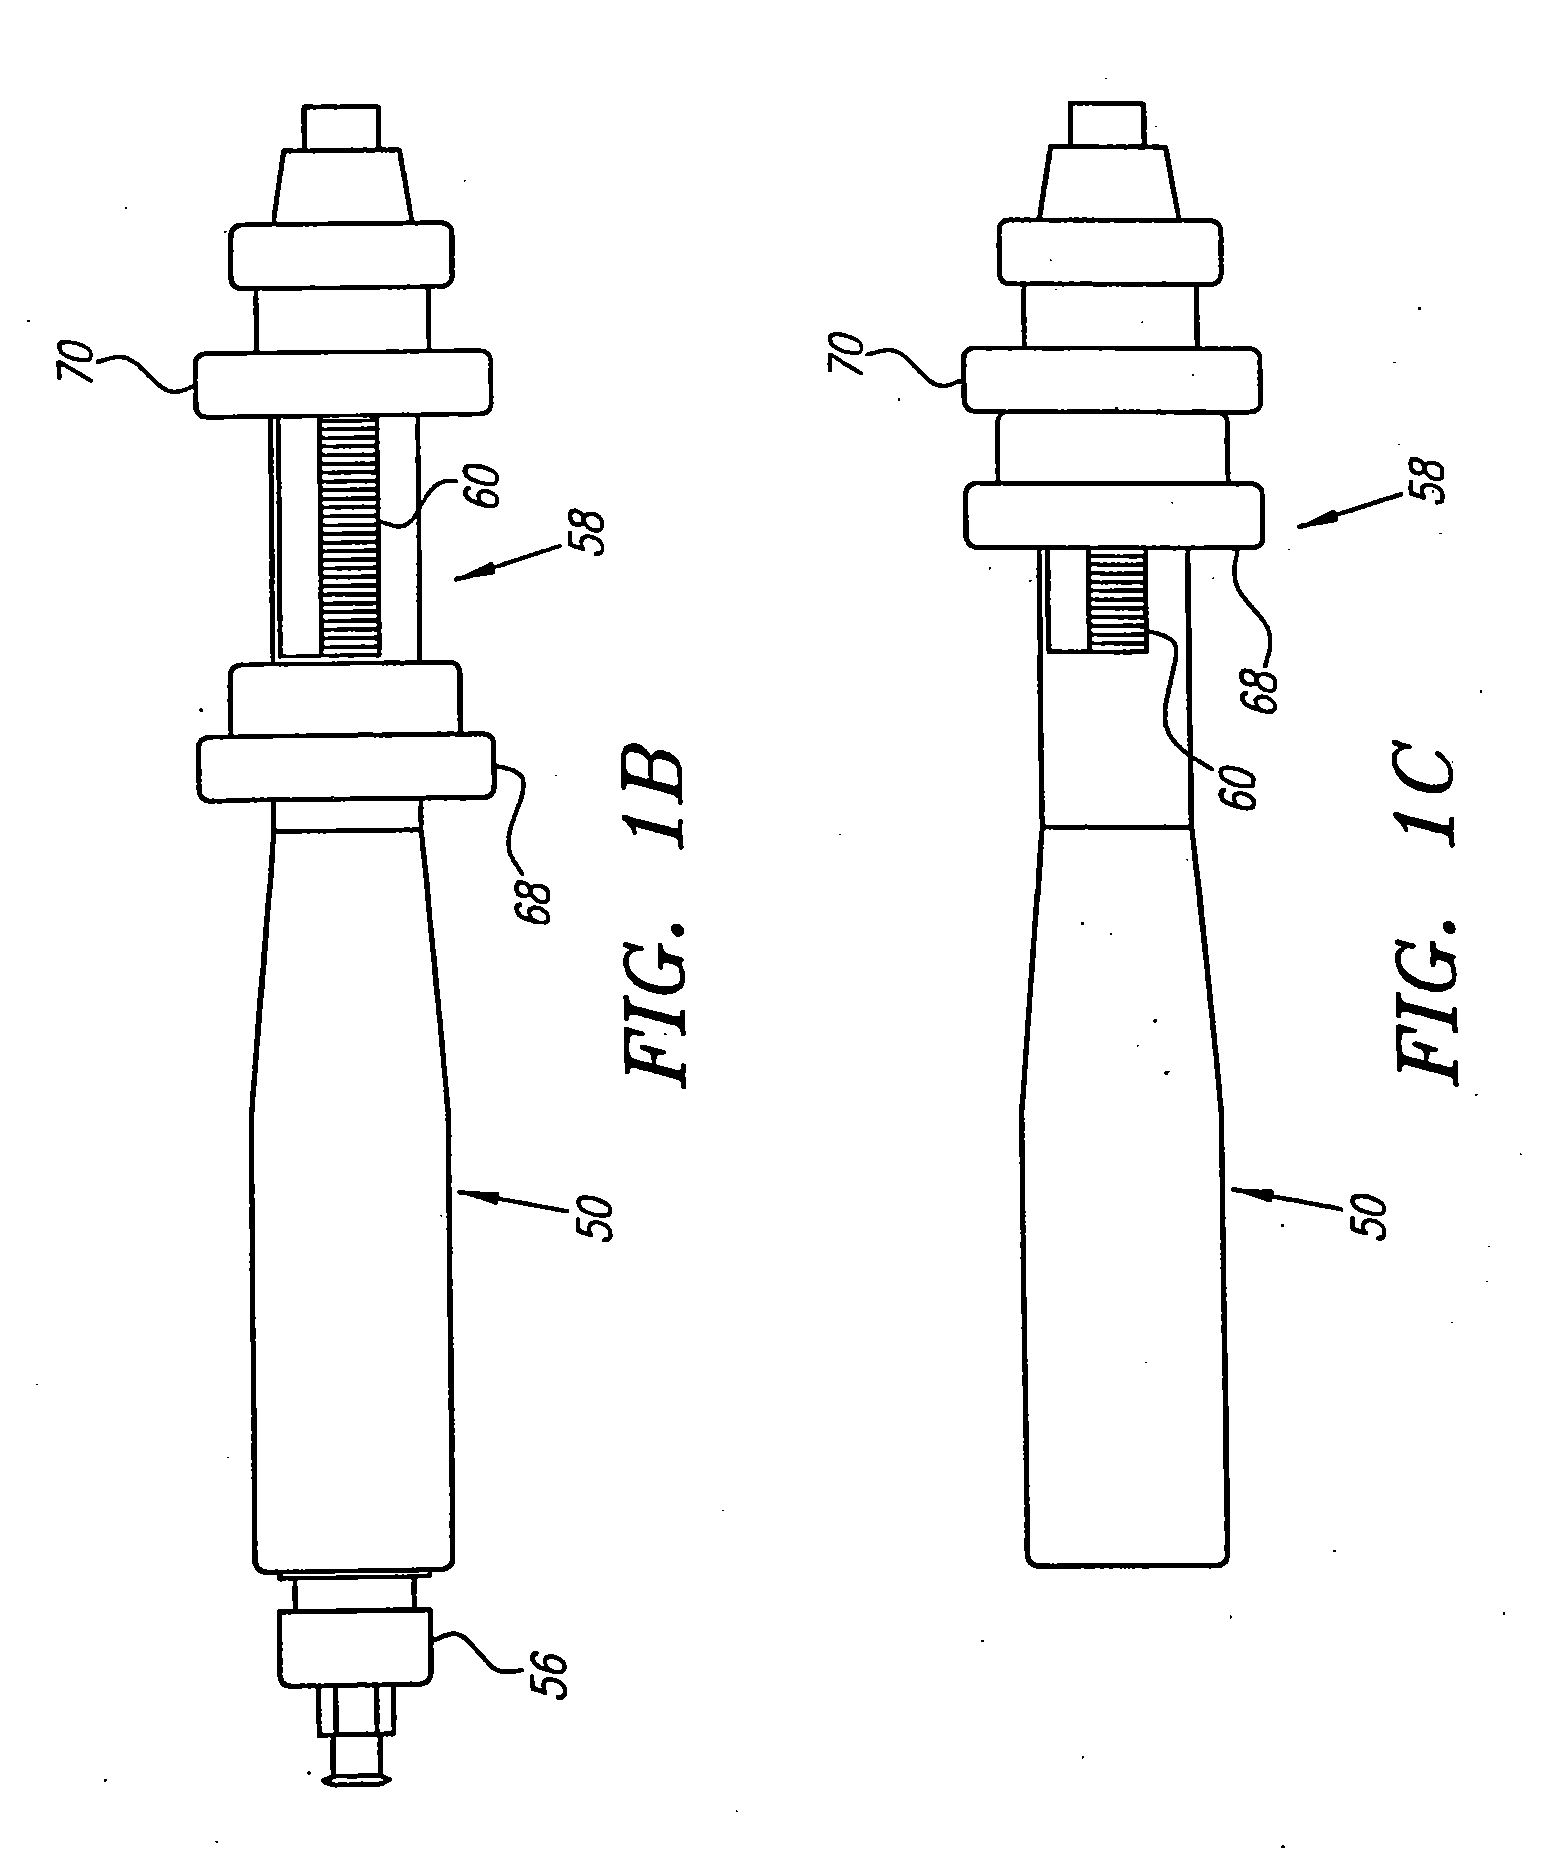 Systems and Methods for Delivering Drugs to Selected Locations Within the Body